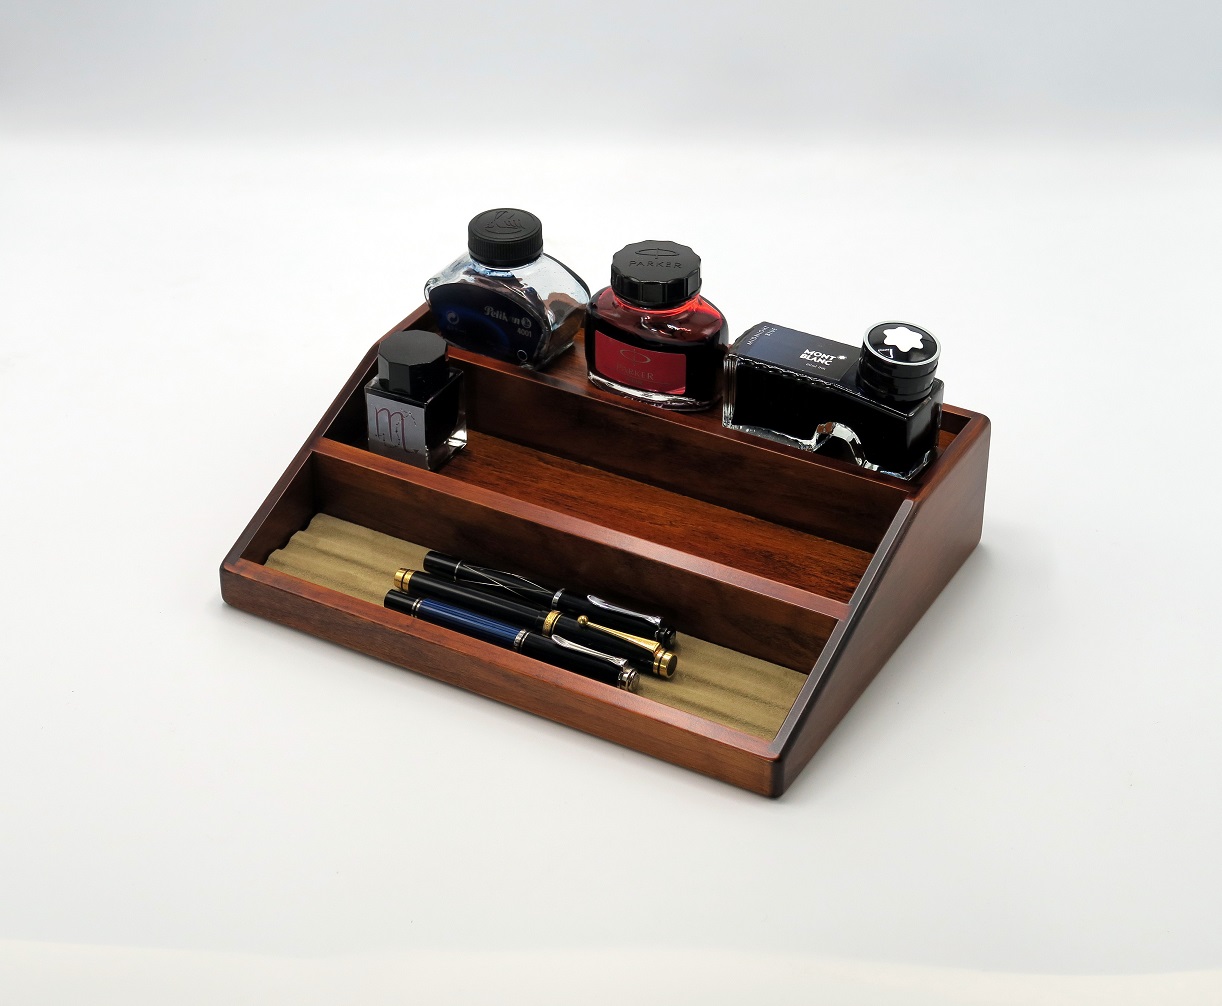 Pen Trays and Accessories: Toyooka Craft and the Beauty of